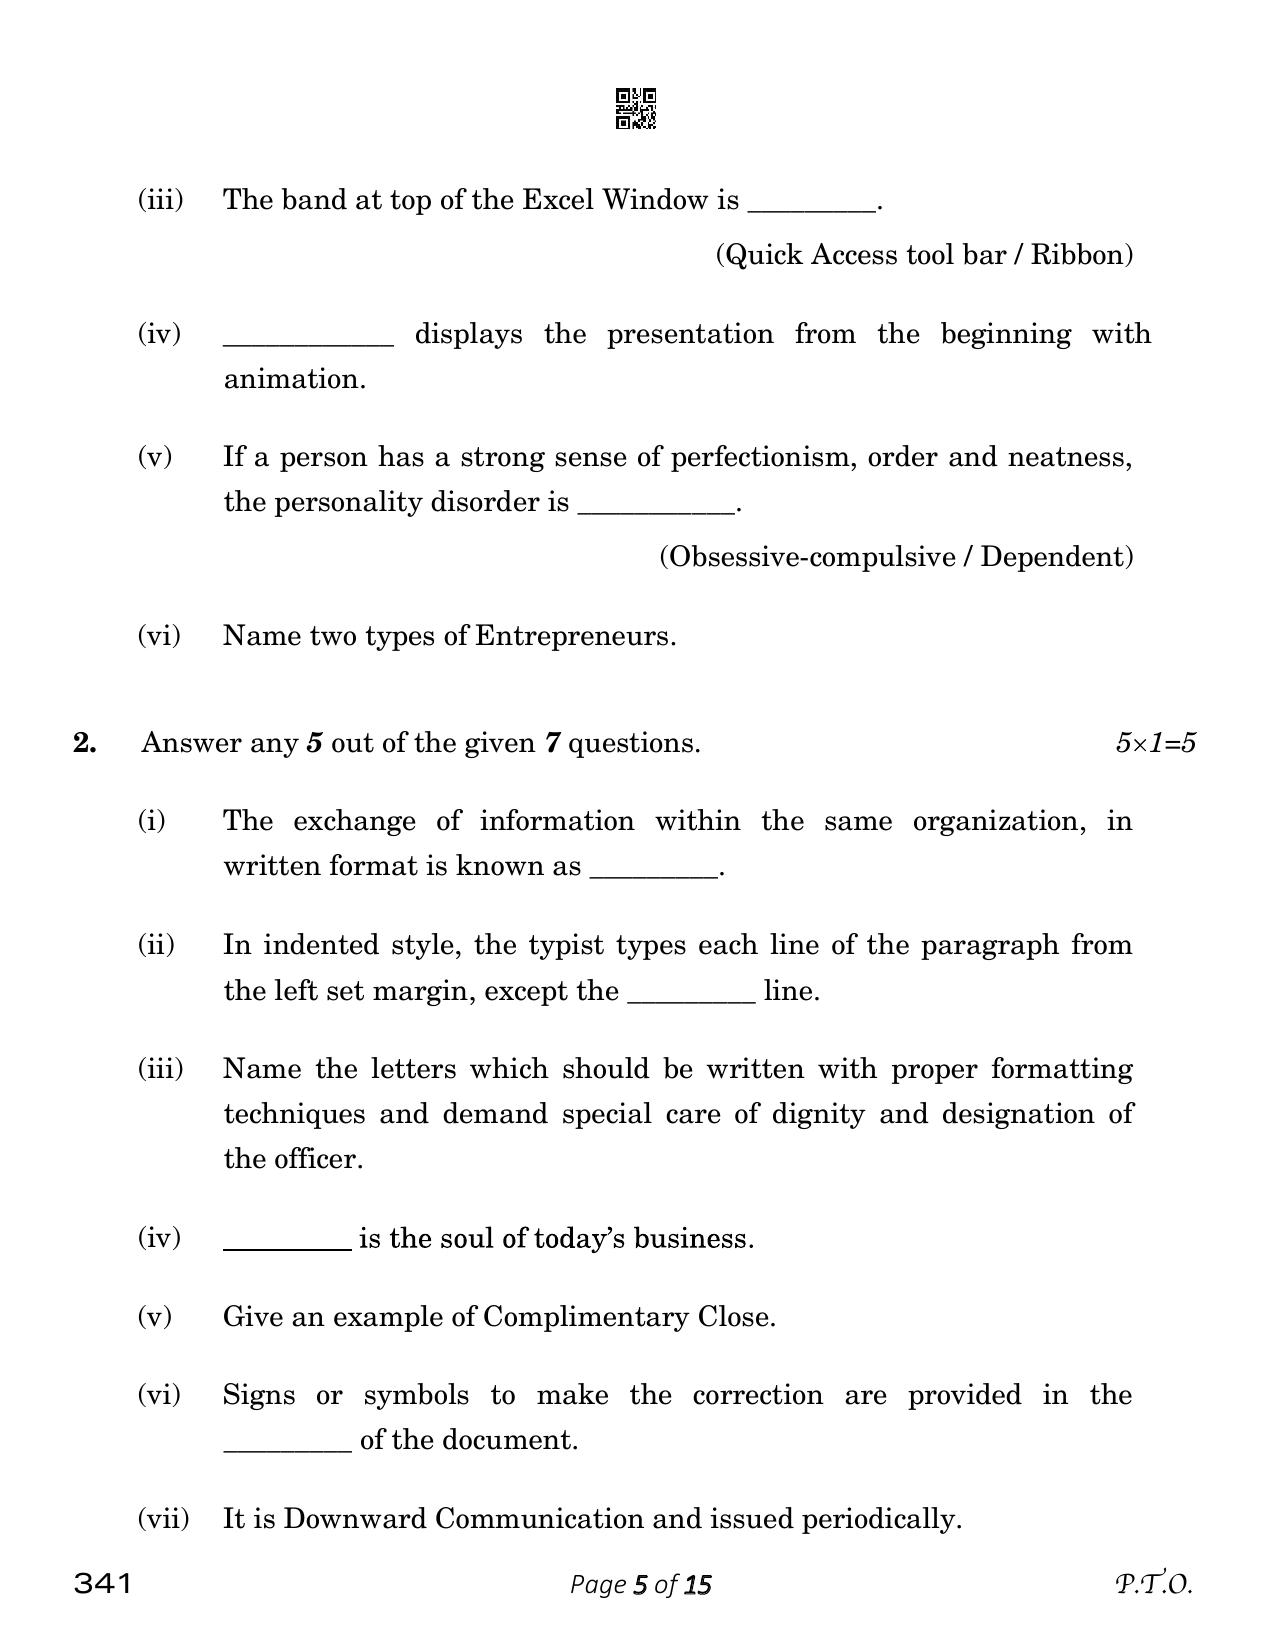 CBSE Class 12 Typography & Computer Applications (Compartment) 2023 Question Paper - Page 5